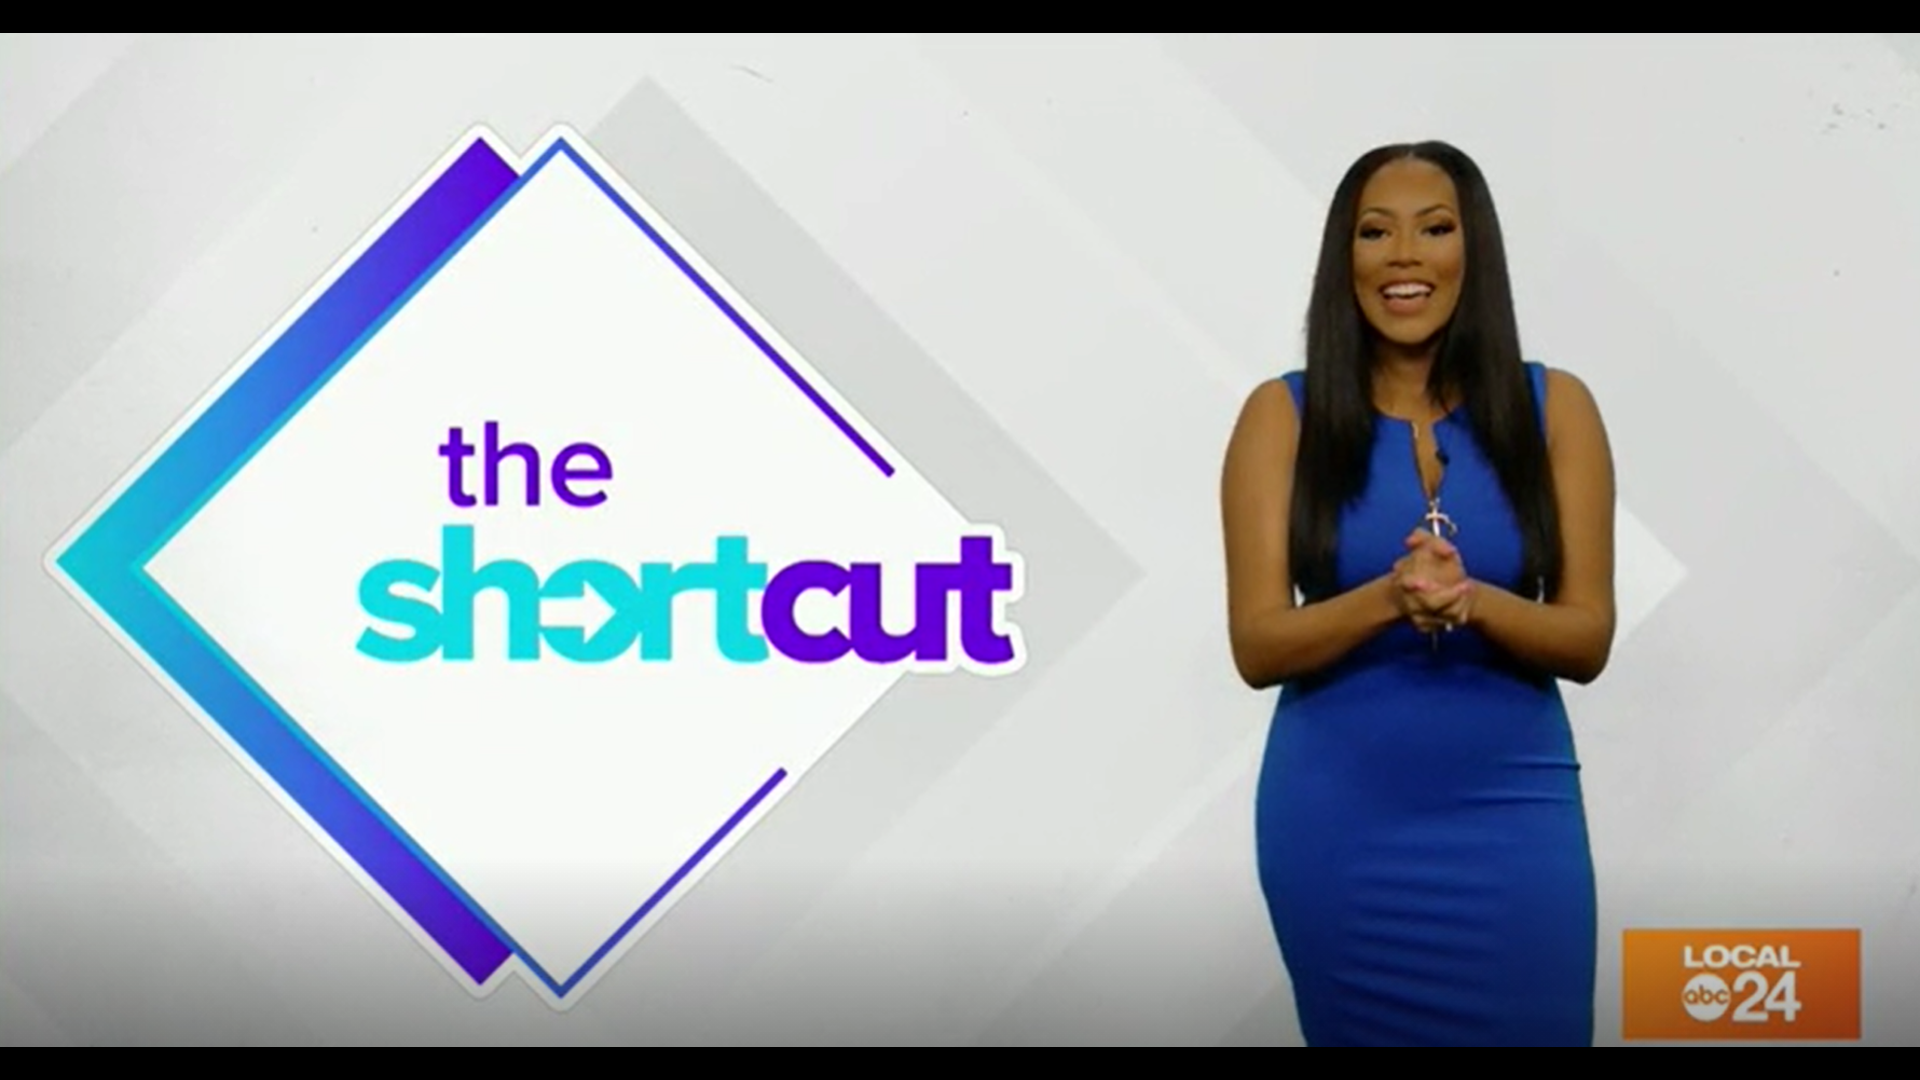 Looking to save money on your grocery bill and make cooking a breeze? Try out these kitchen hacks starring Sydney Neely on The Shortcut!